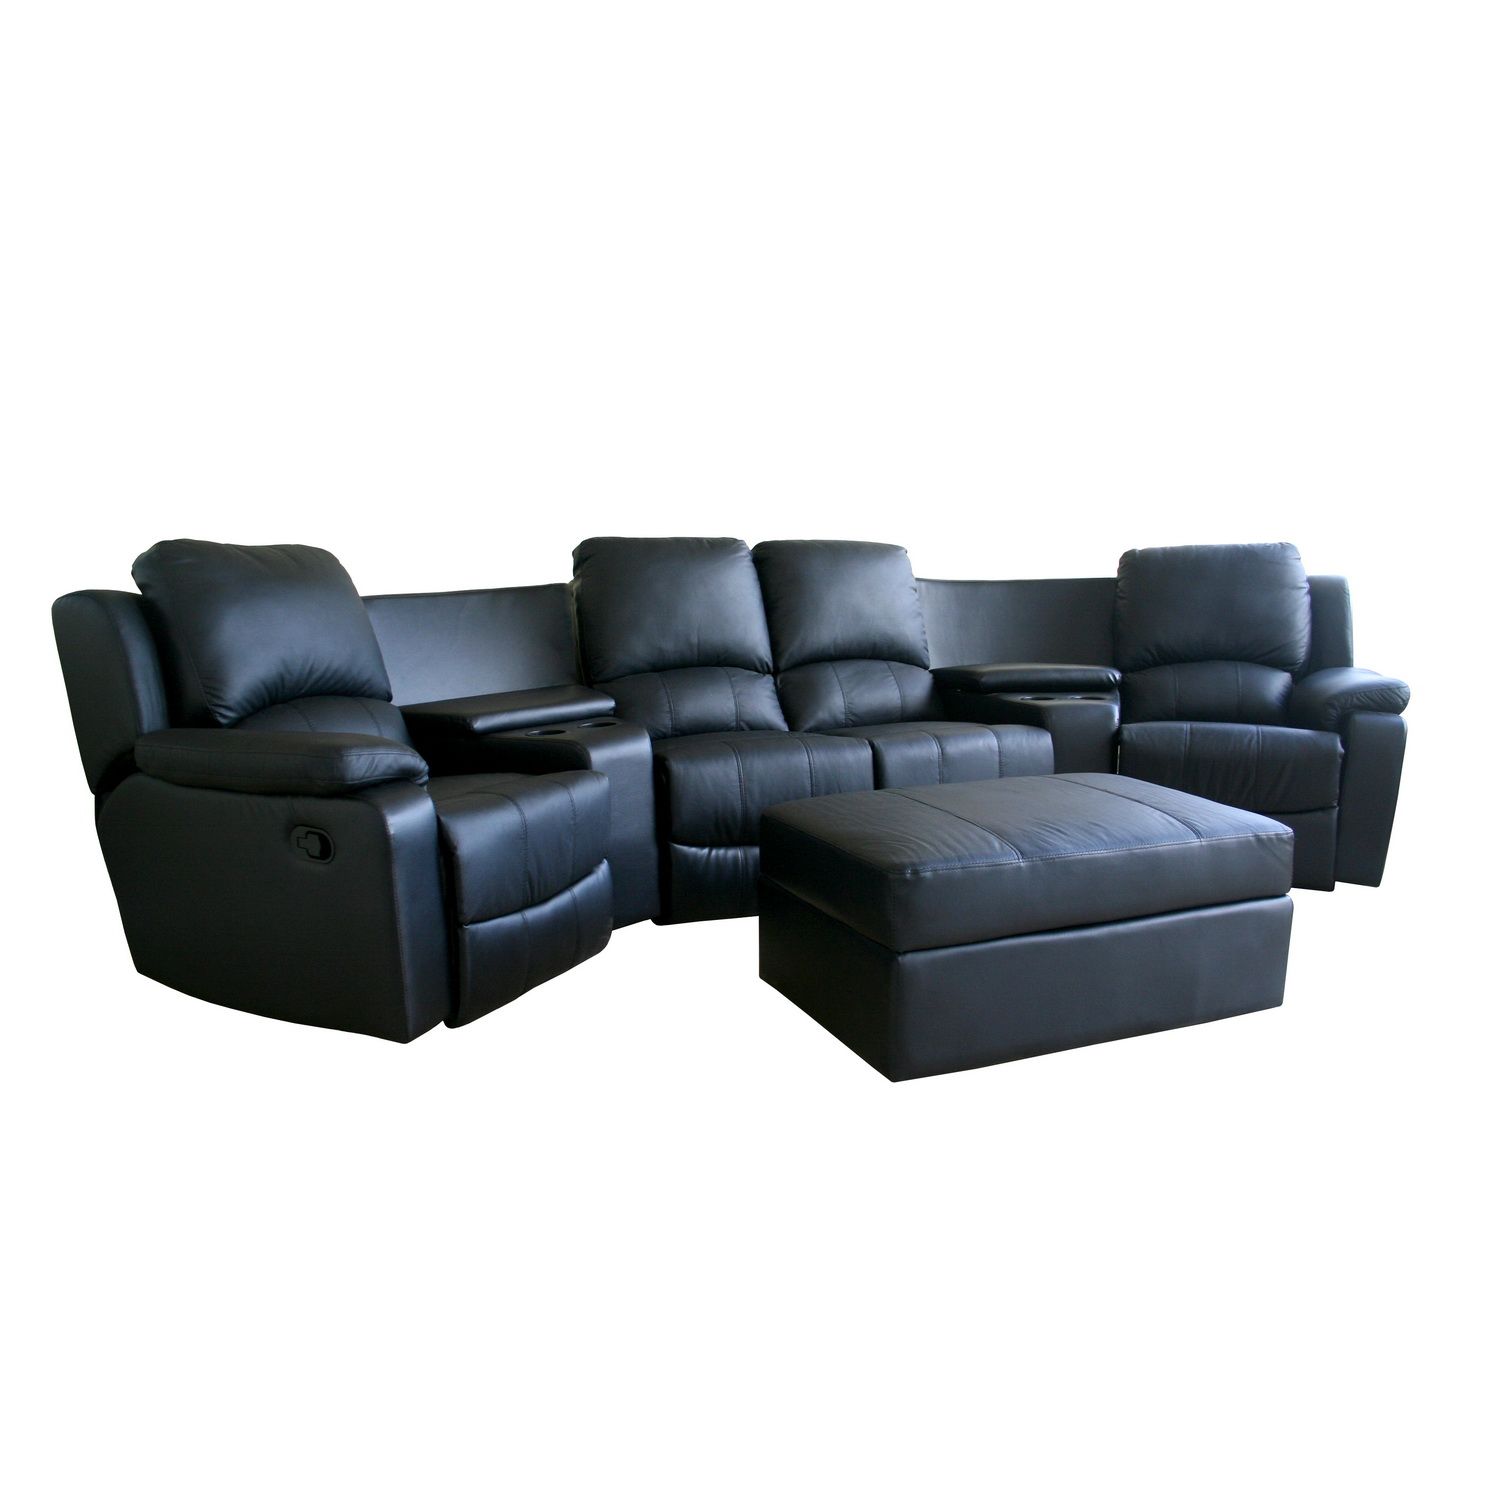 Baxton Studio Arviragus Leather Curved 7-pcs Home Theater Sectional in Black